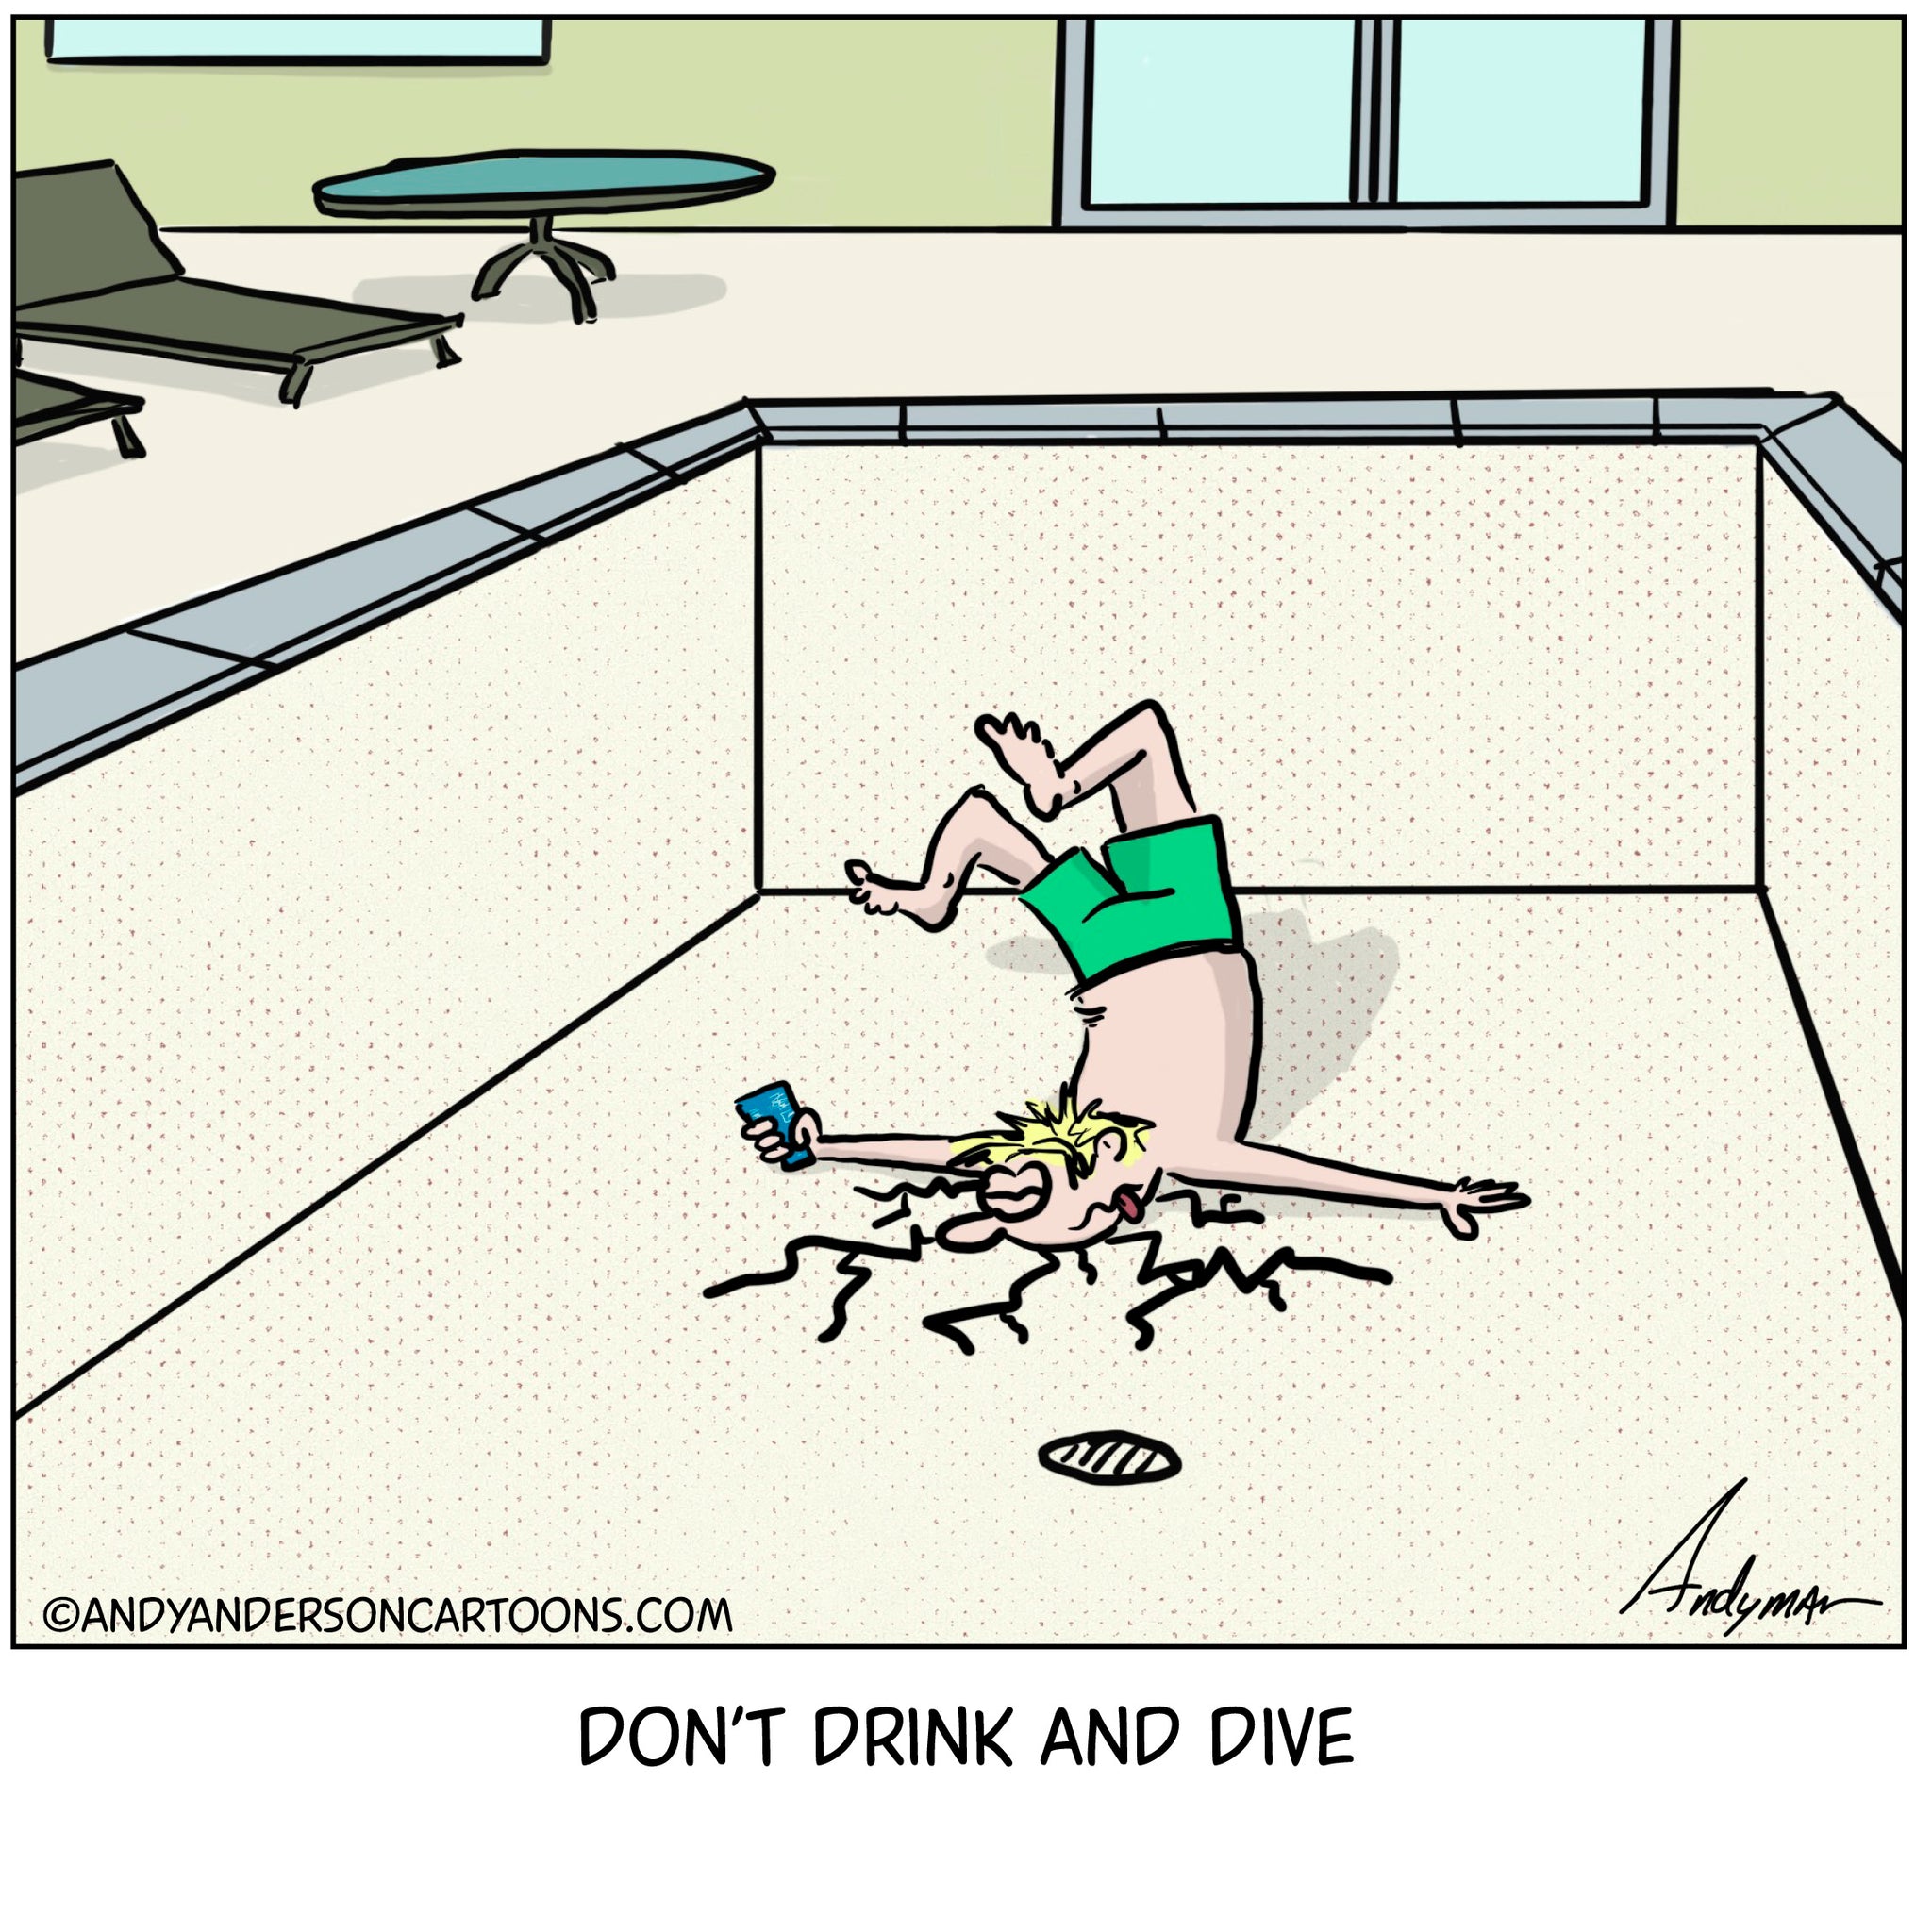 Drink and dive cartoon